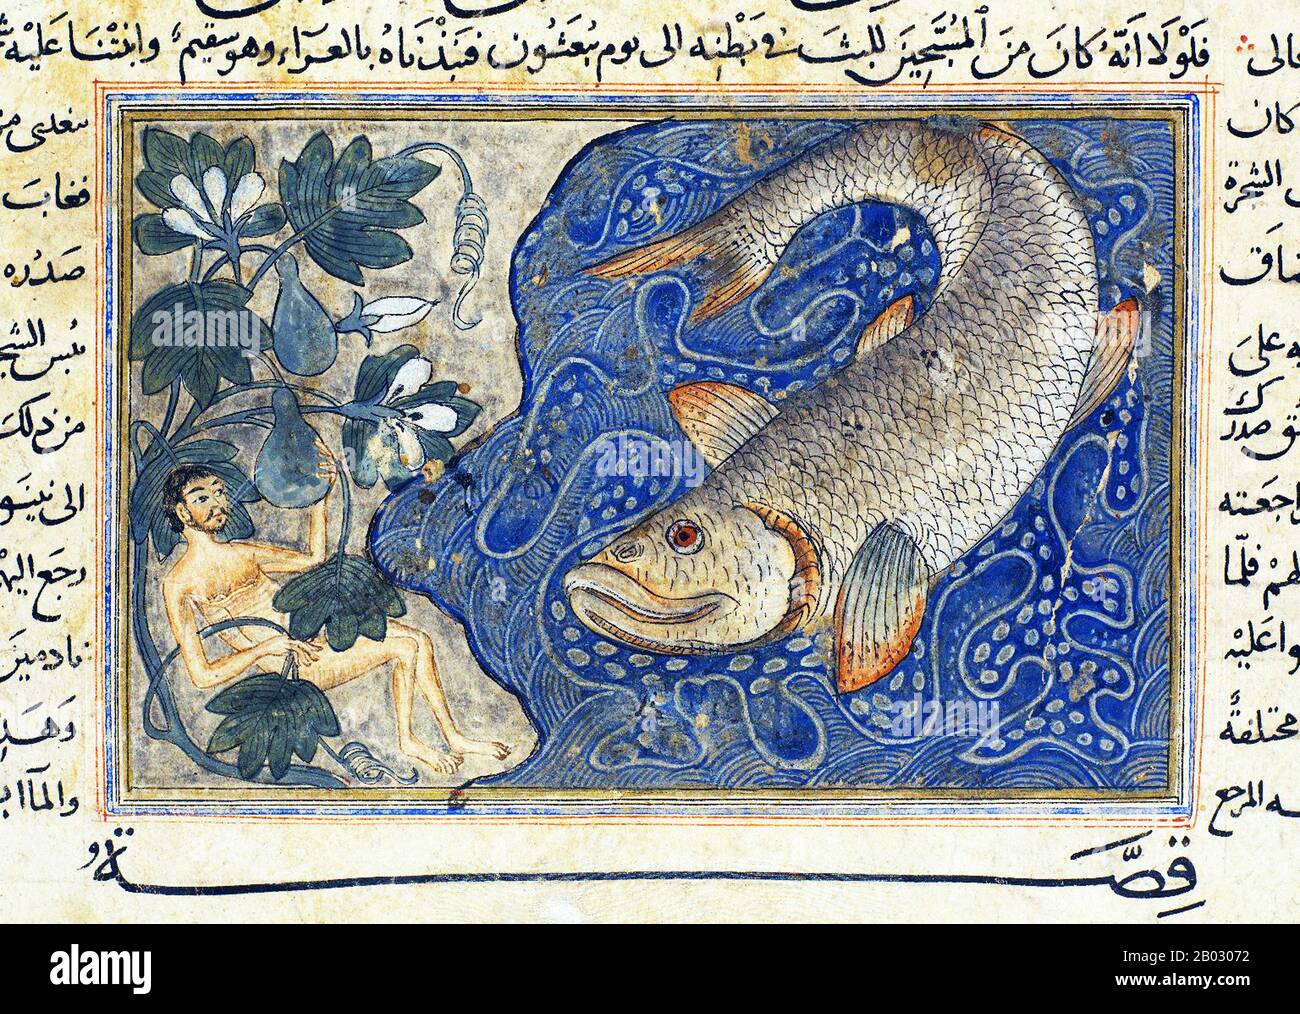 Jonah or Jonas (Arabic: Yunus) is the name given in the Hebrew Bible (Tanakh/Old Testament) to a prophet of the northern kingdom of Israel in about the 8th century BCE. He is the eponymous central character in the Book of Jonah, famous for being swallowed by a fish or a whale, depending on translation.  The biblical story of Jonah is repeated, with a few notable differences, in the Qur'an. Stock Photo